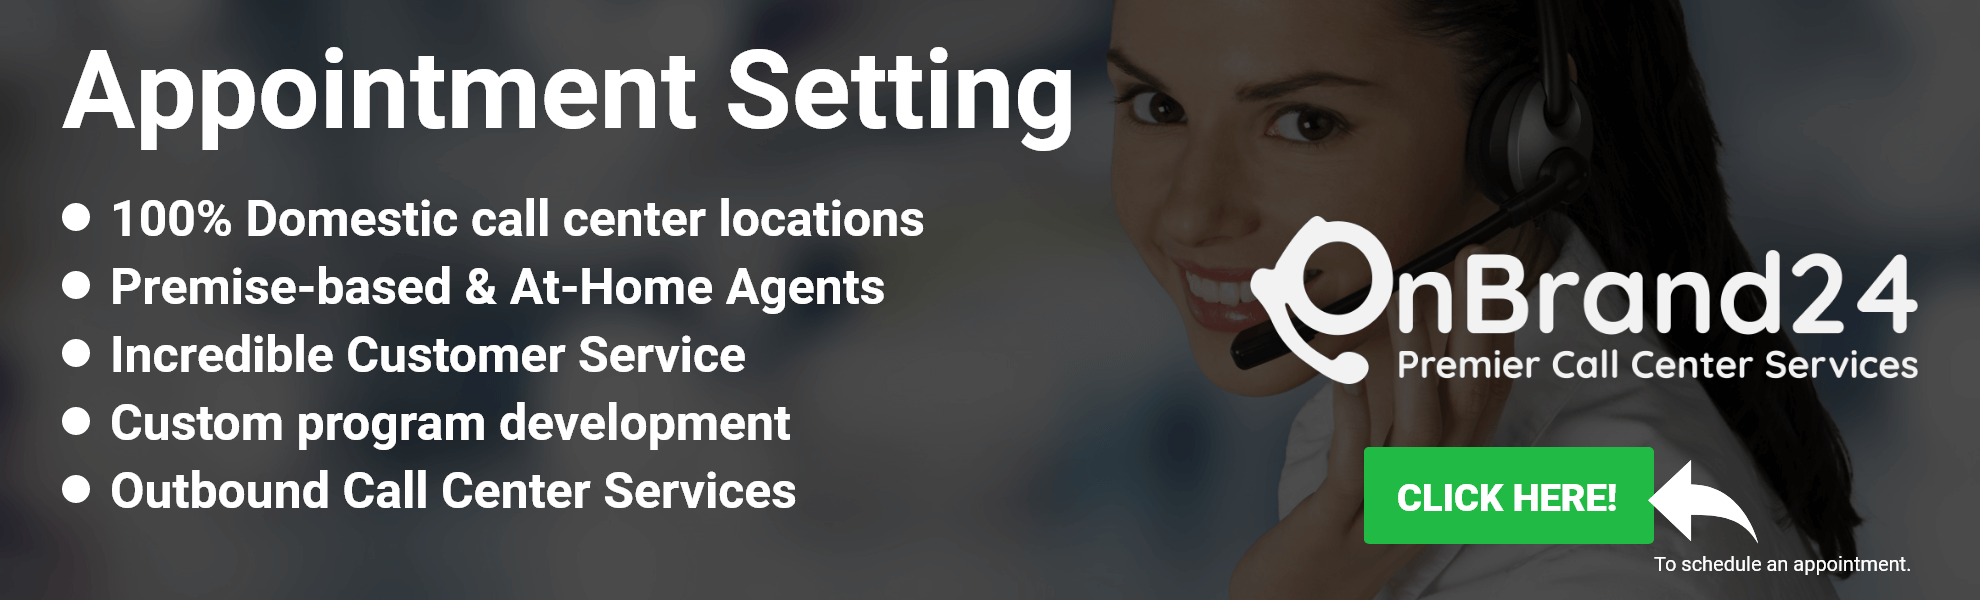 Appointment Setting Call Center Service